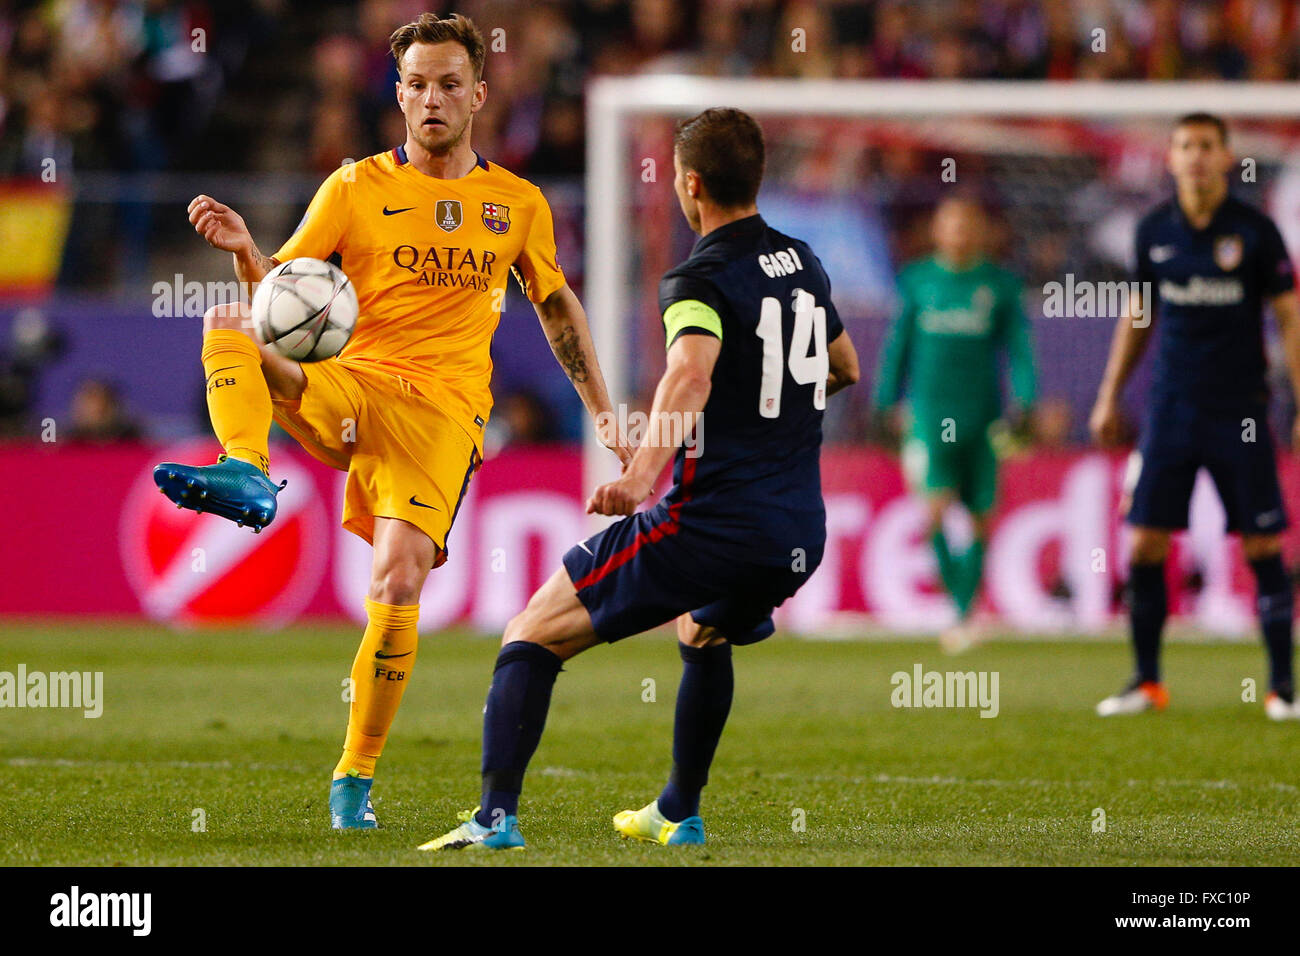 Madrid, Spain. 13th Apr, 2016. Ivan Rakitic (4) FC Barcelona. UCL Champions League between Atletico de Madrid and FC Barcelona at the Vicente Calderon stadium in Madrid, Spain, April 13, 2016 . © Action Plus Sports/Alamy Live News Stock Photo